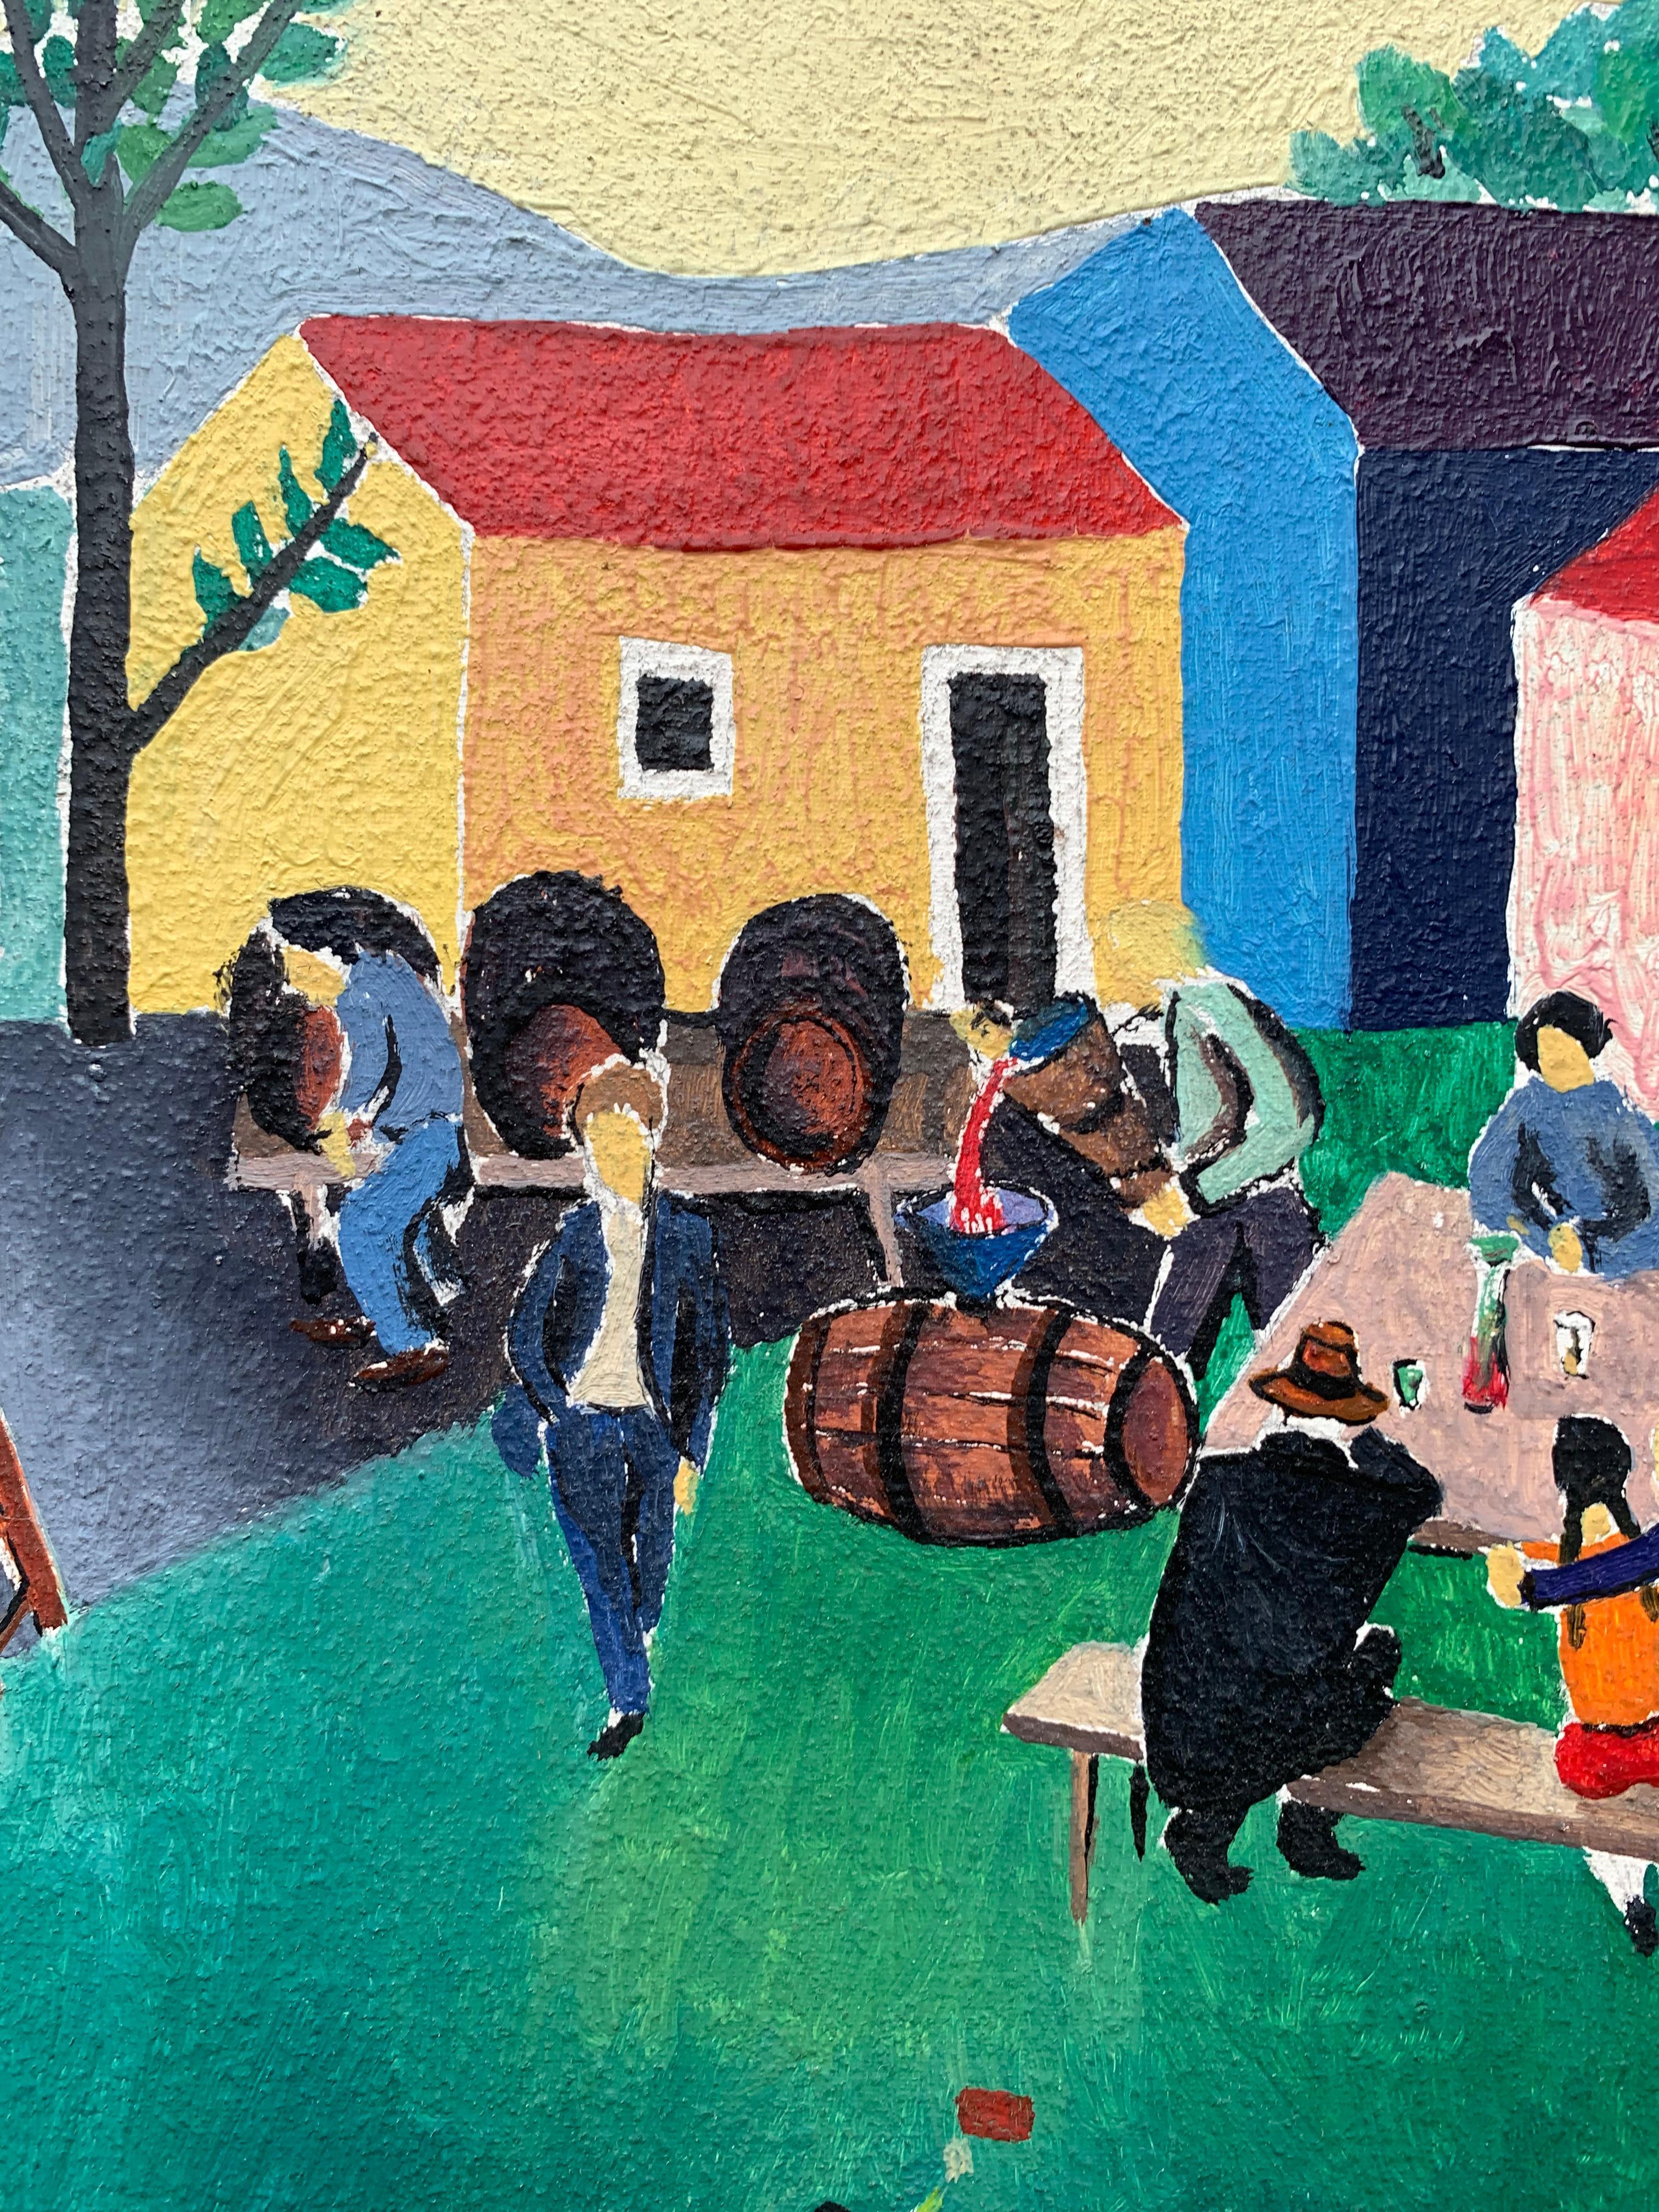 Art Naif. 
Painting from 1960s.
Wine festival.

Dimensions: cm 81 x 59
The painting represents a cheerful popular scene with a musical band, people dancing, a man pouring wine from wooden barrels, tables full of colorfully dressed people.
A childish